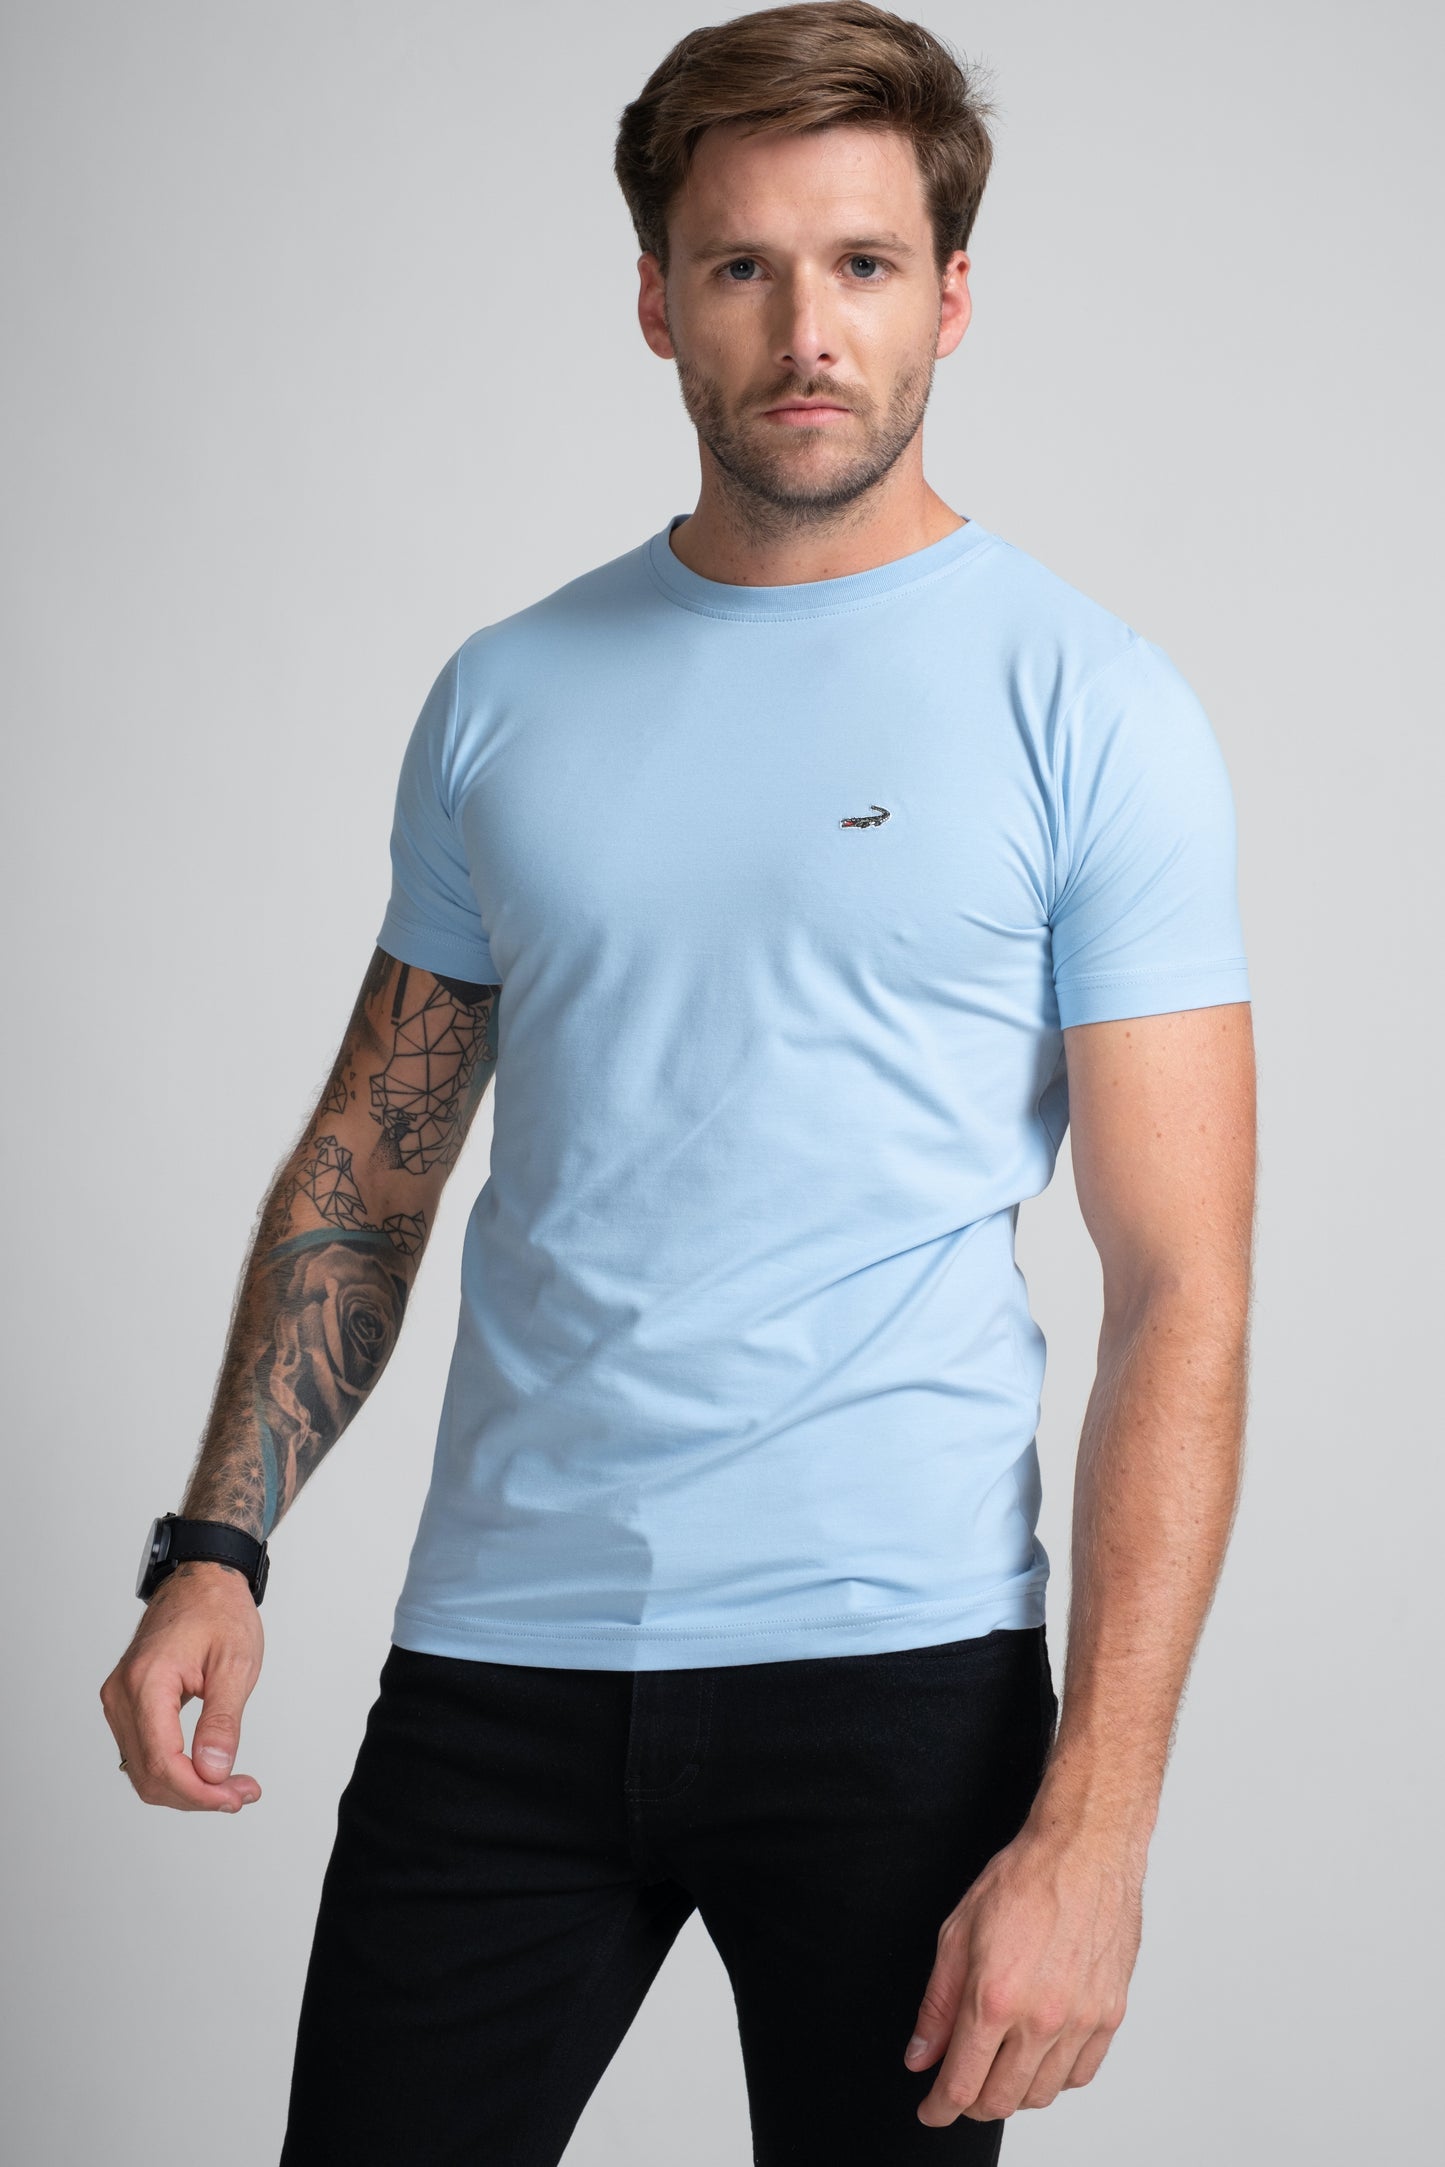 Action Fit Short sleeves-CasualCrew Neck - Blue Bell